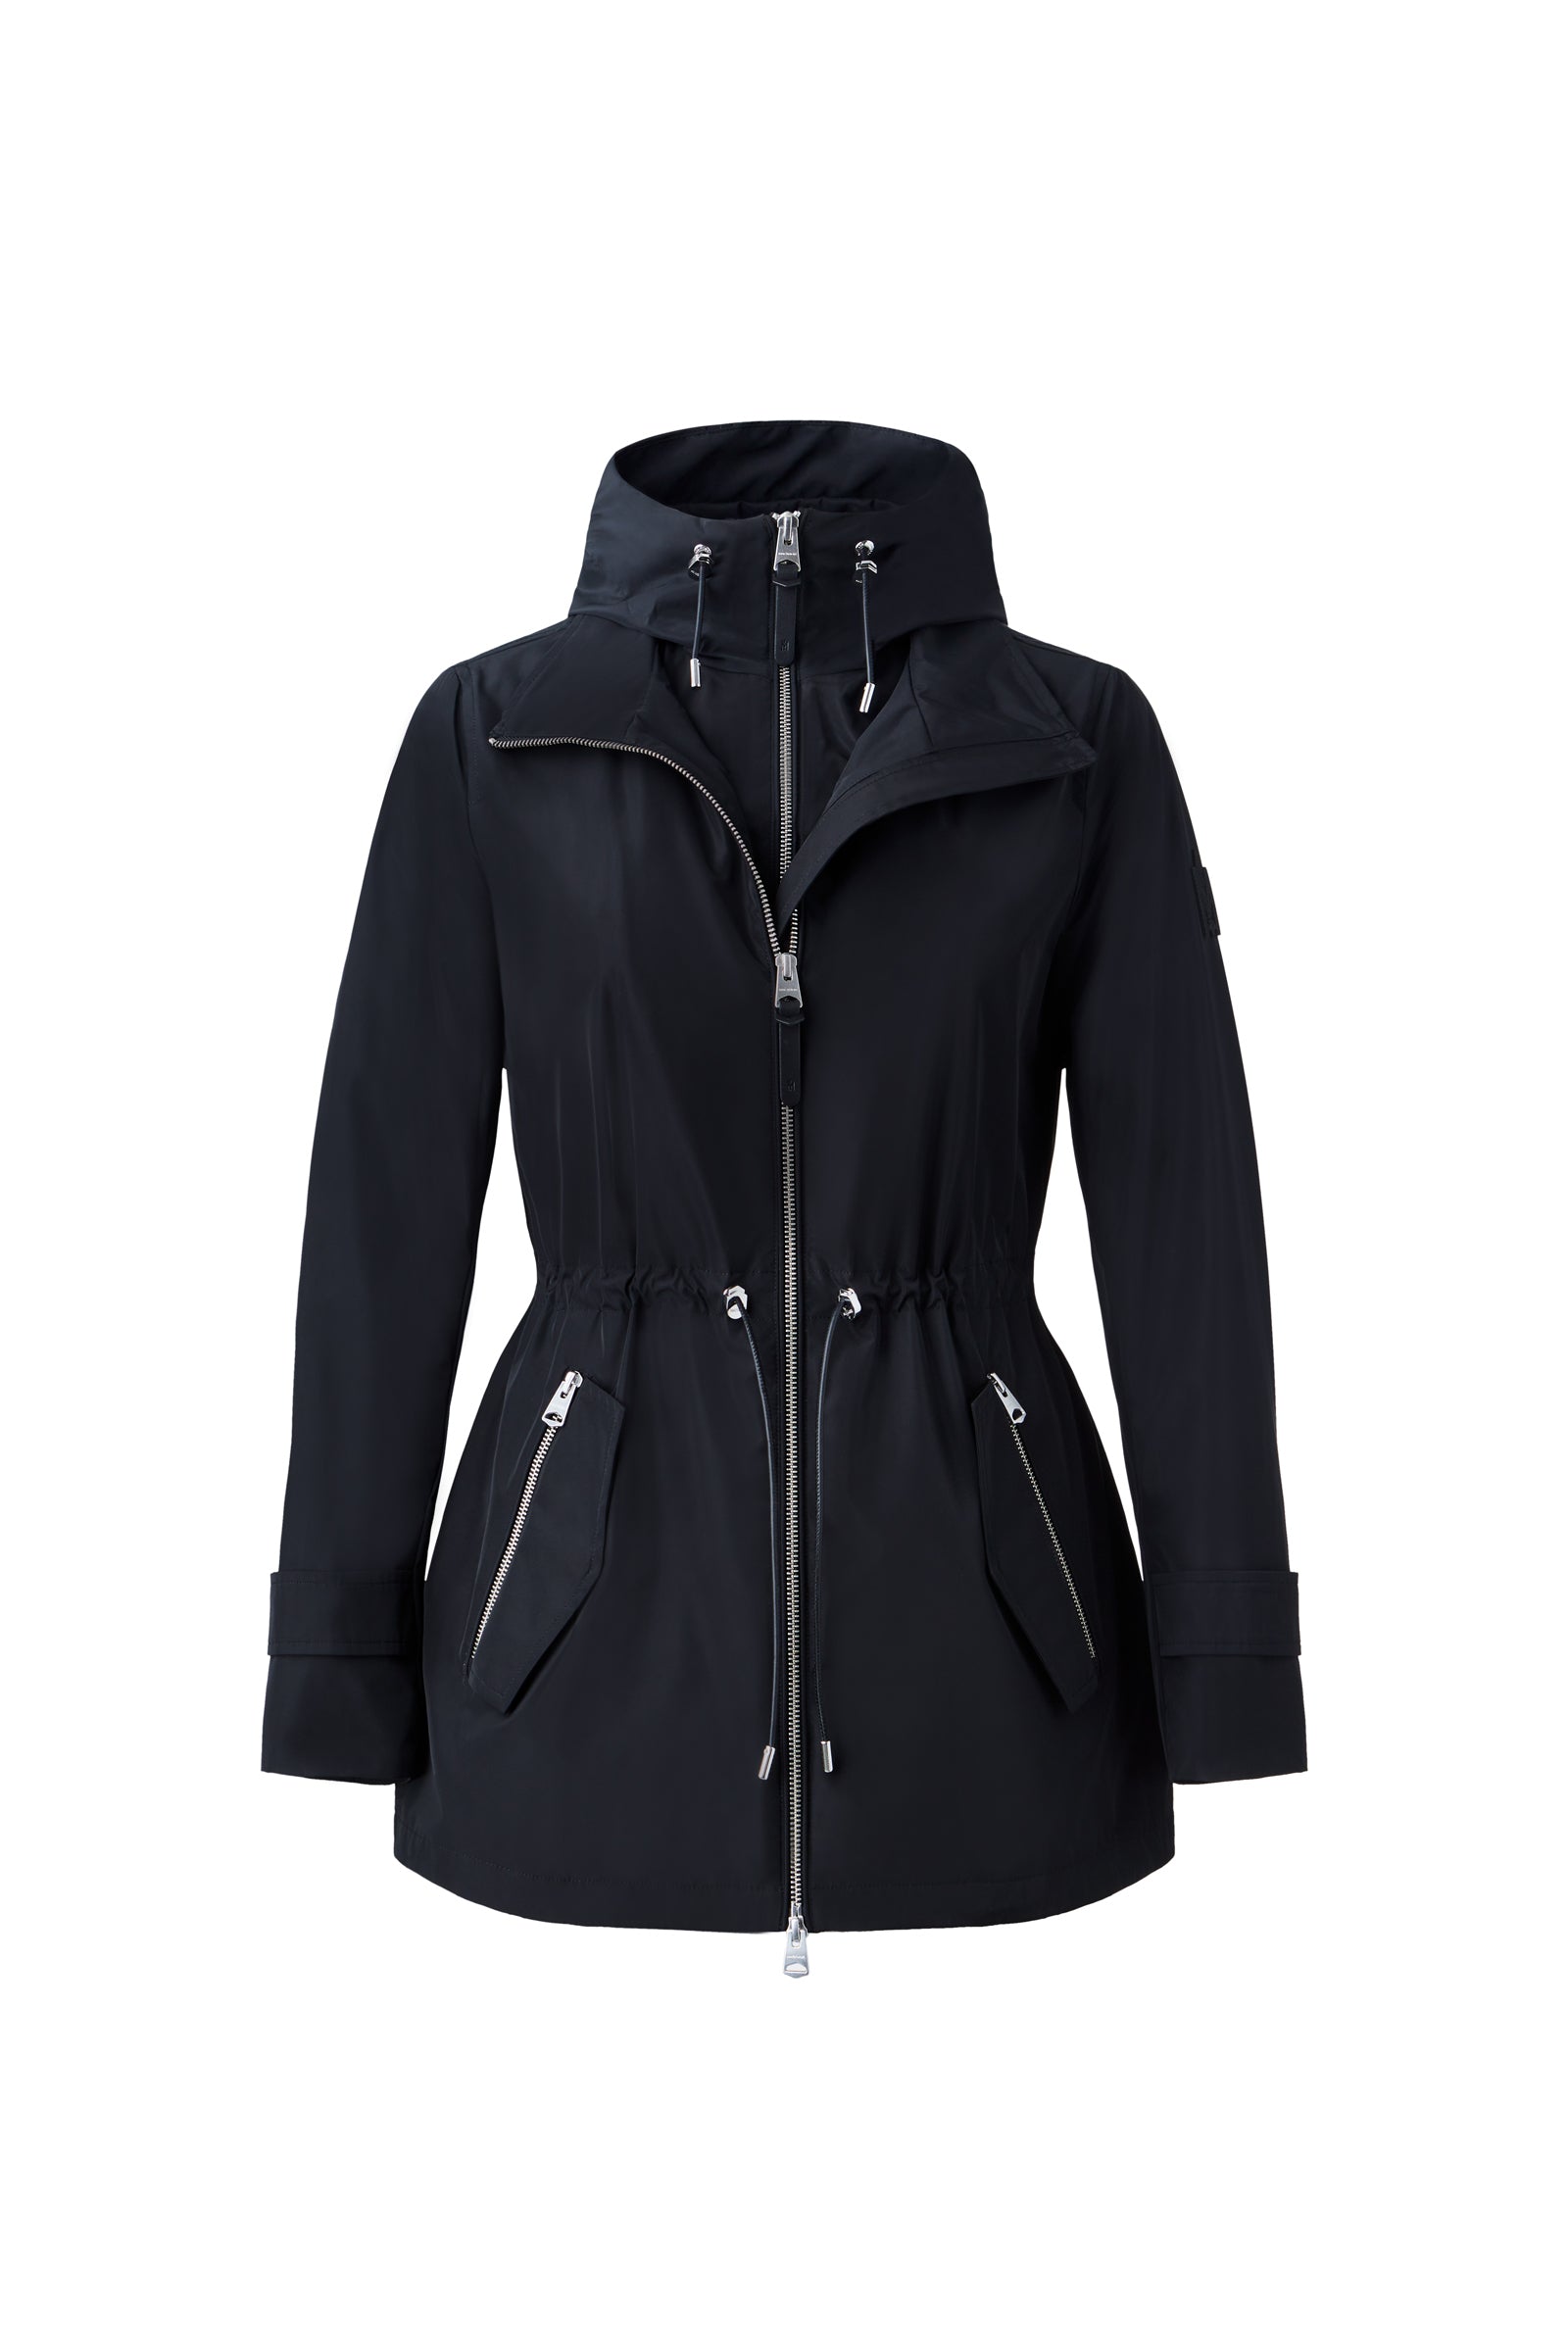 Mackage Melany 2-in-1 Rain Parka With Removable Bib Black, Size: